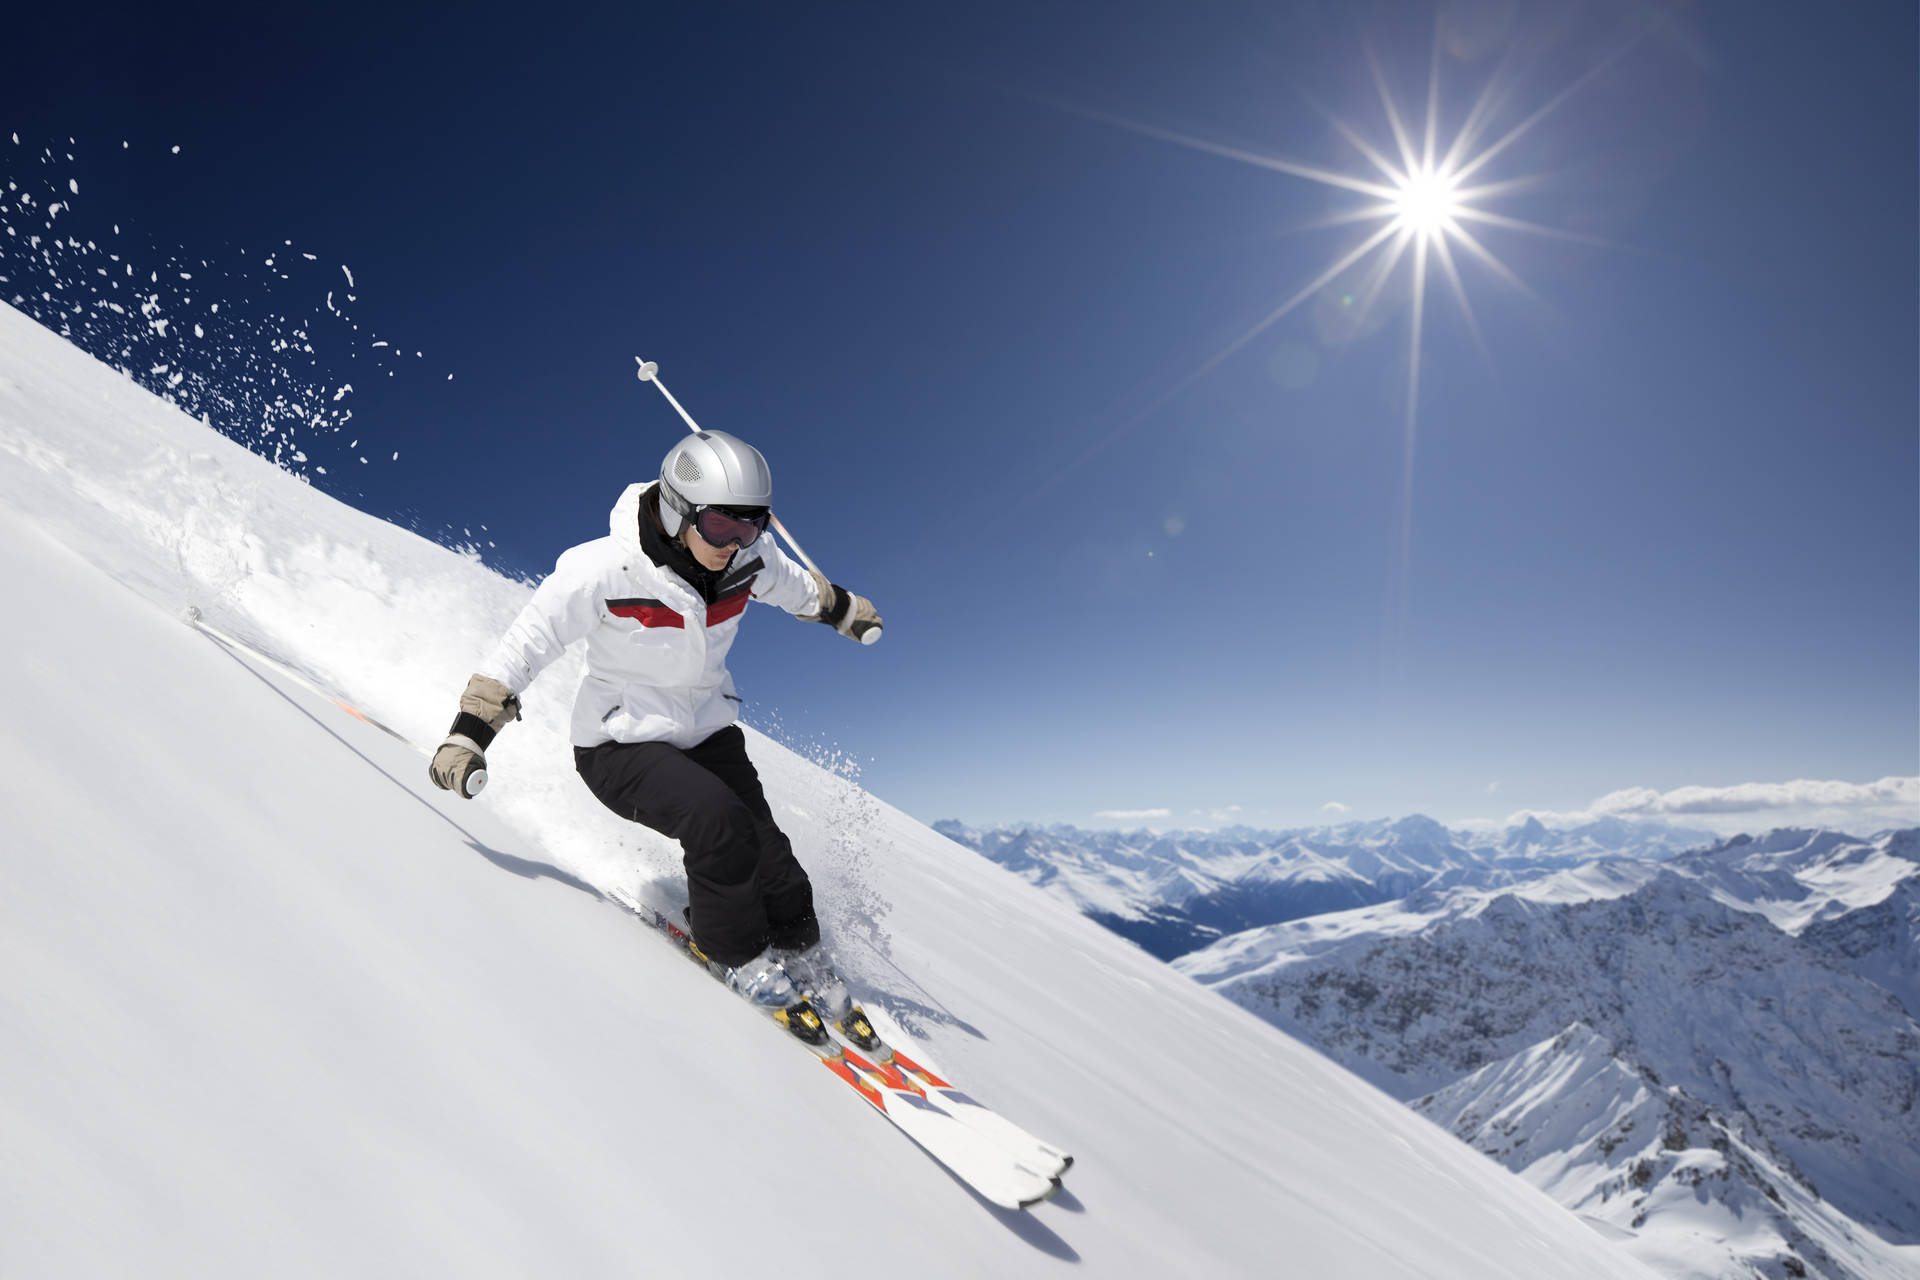 Skiing With Sun Background